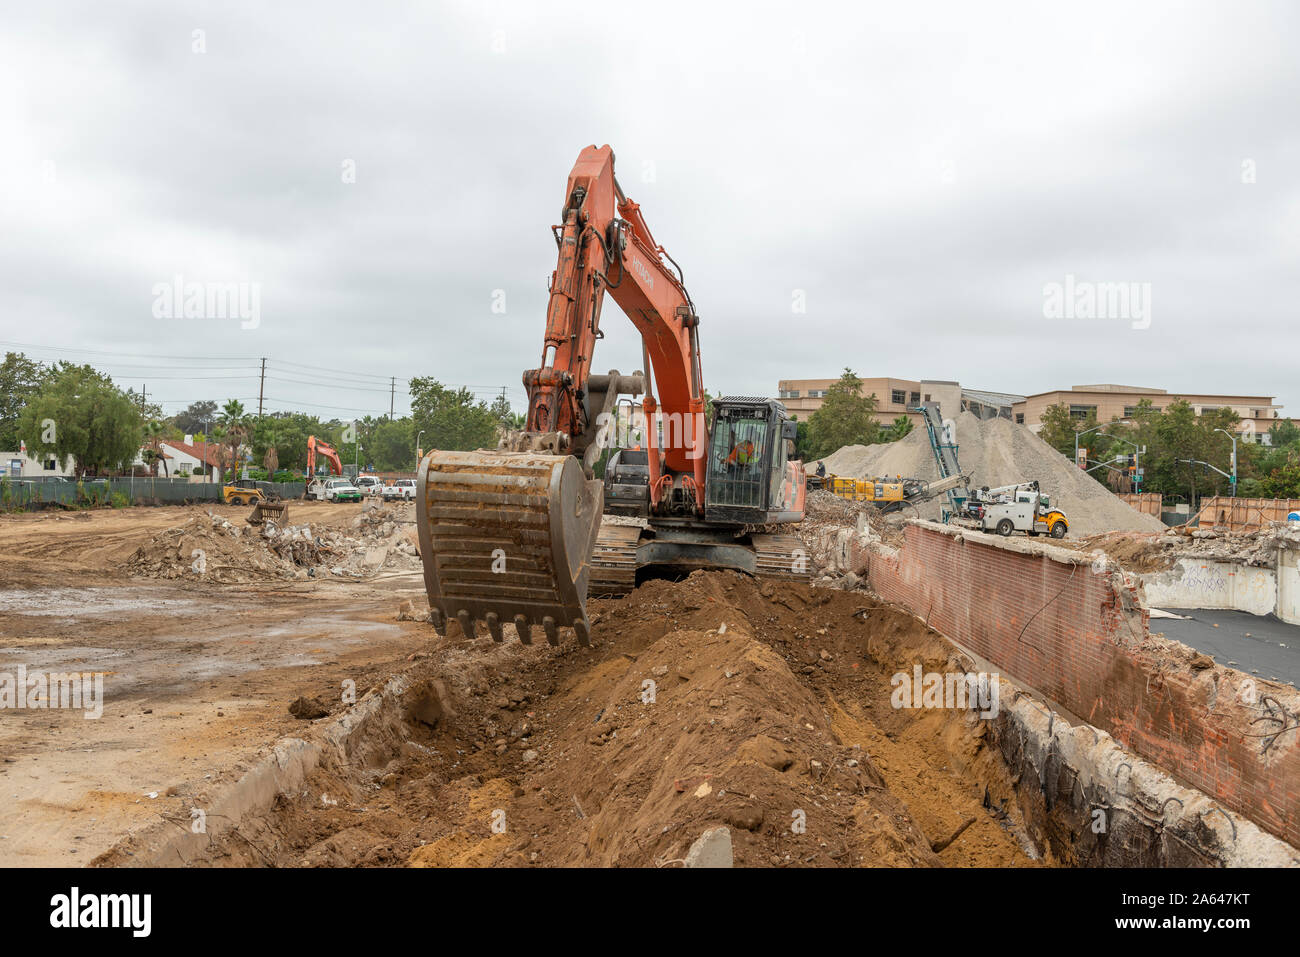 Hitachi excavator digging at construction site, Old Town, San Diego, California Stock Photo